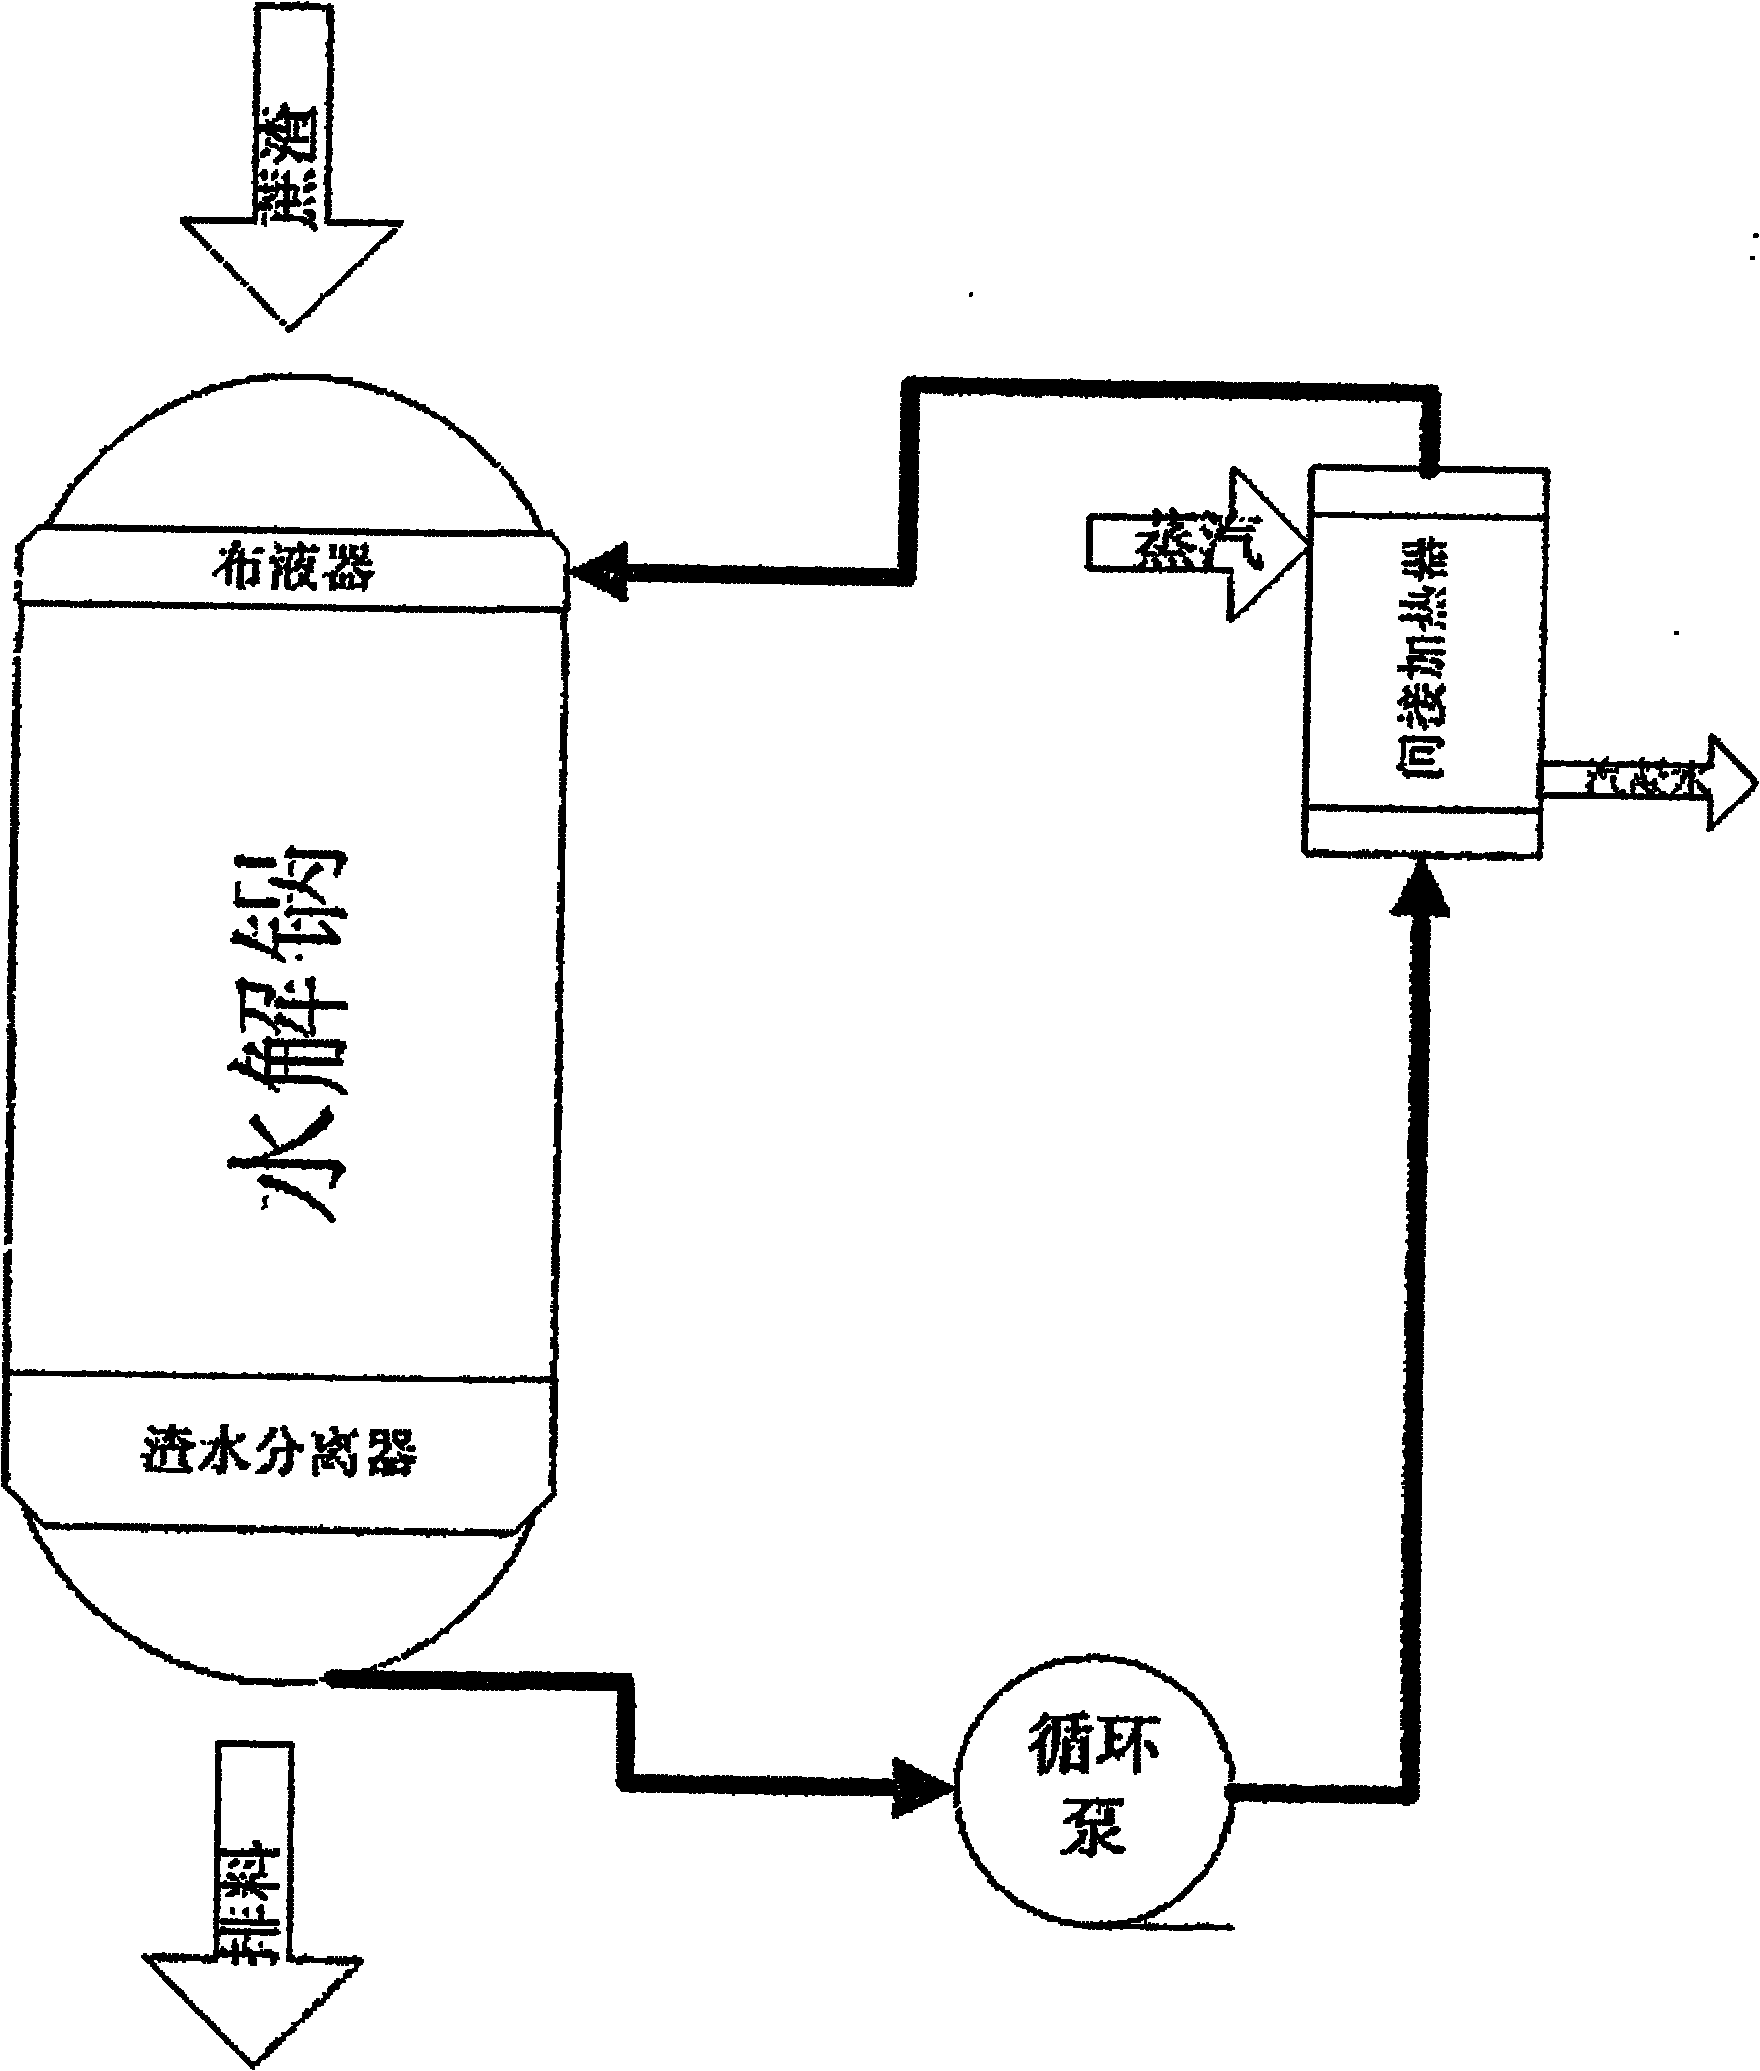 Hydrolysis method for producing xylose from bagasse